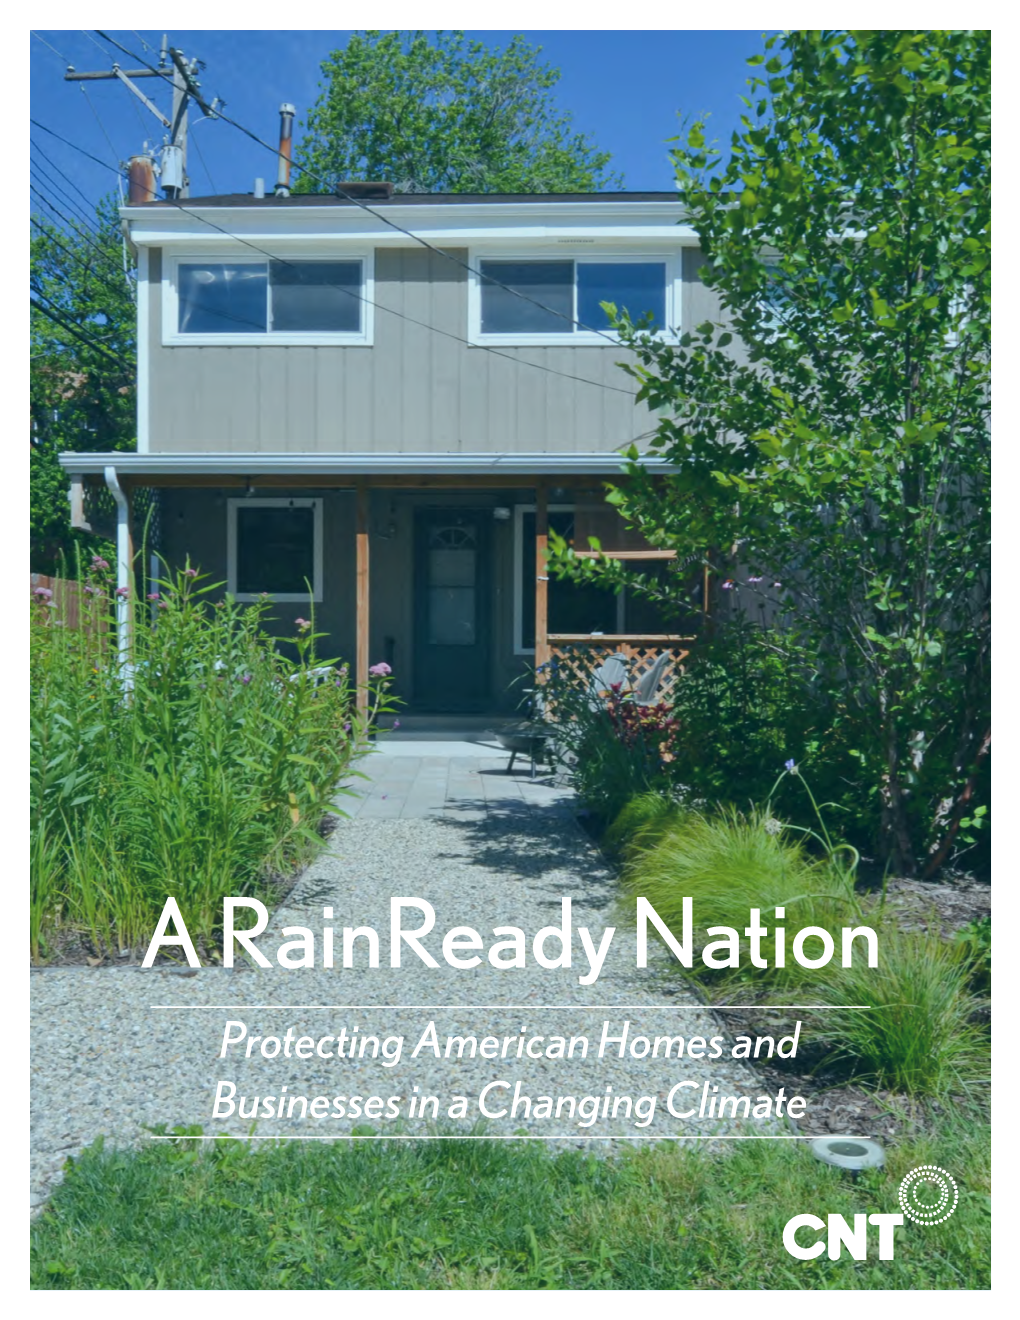 A Rainready Nation Protecting American Homes and Businesses in a Changing Climate